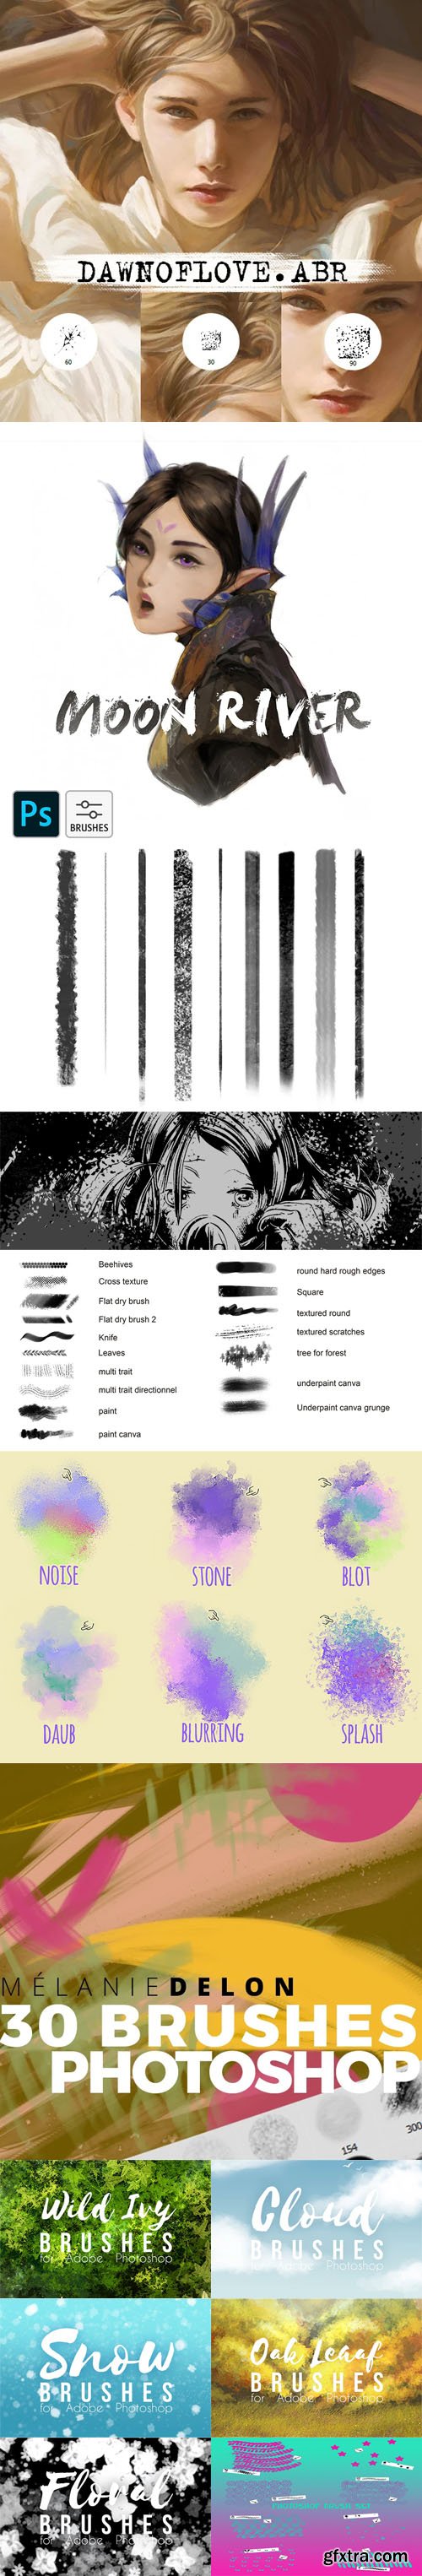 10+ Sets of Brushes for Photoshop